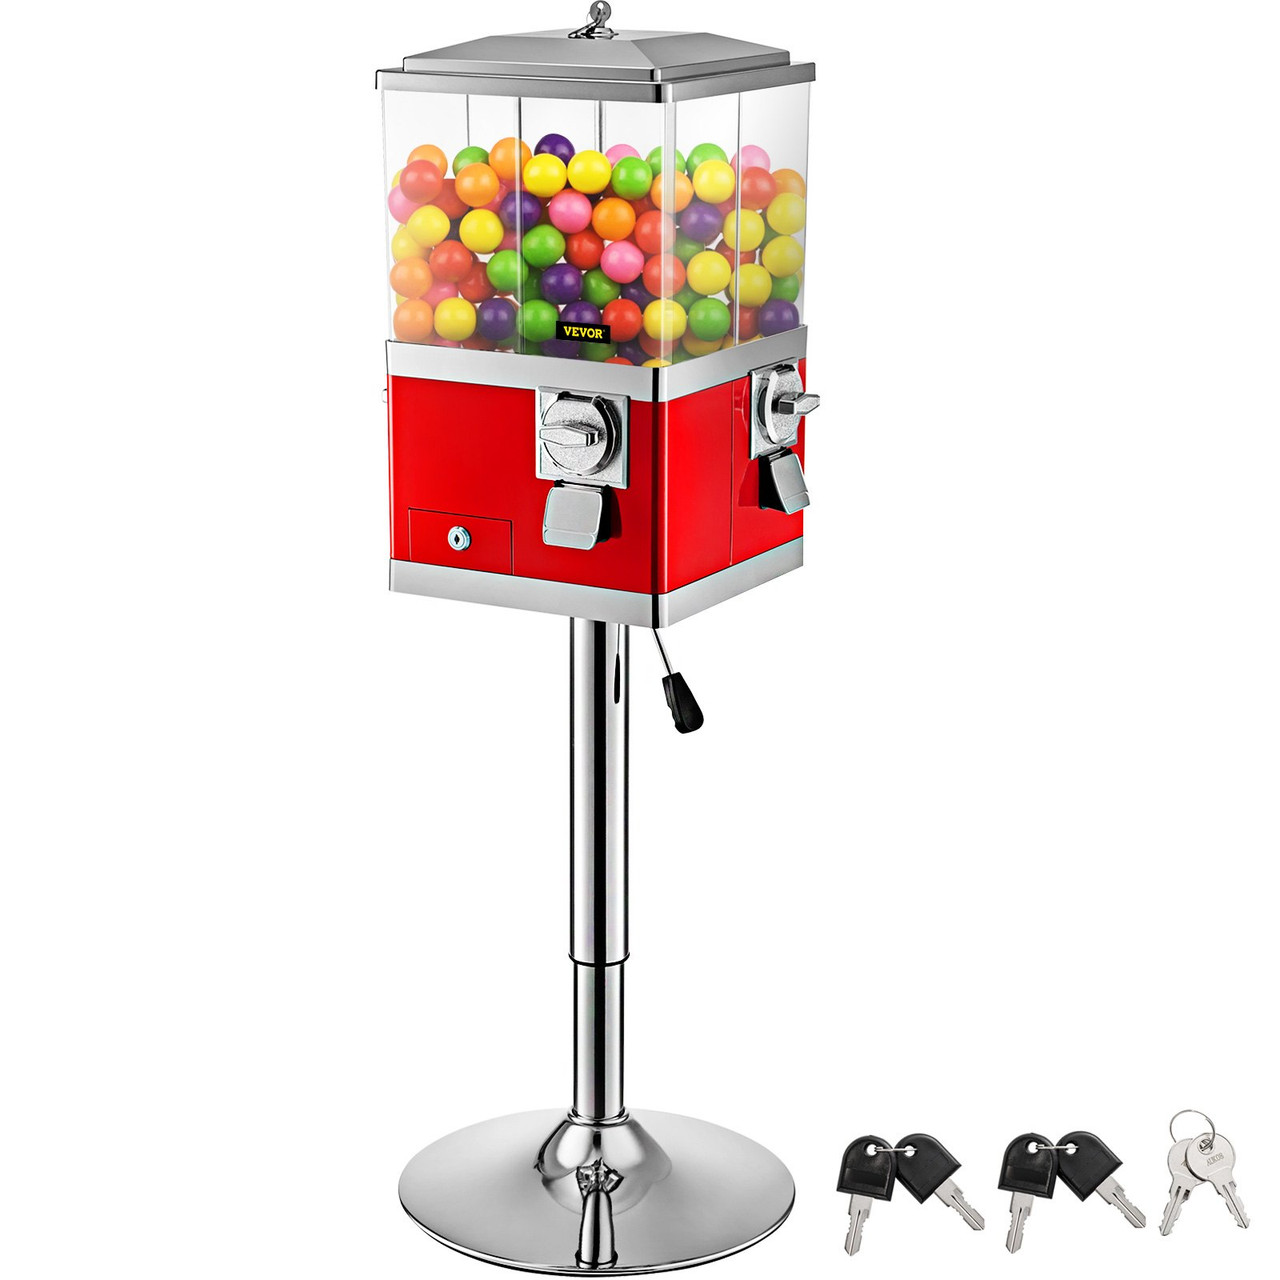 Vending Machine with Stand,Rotatable Four Compartments Square Candy Vending Machine, PC & Iron Large Gumball Bank Adjustable Dispenser Wheels for 1" Gumballs (Red)